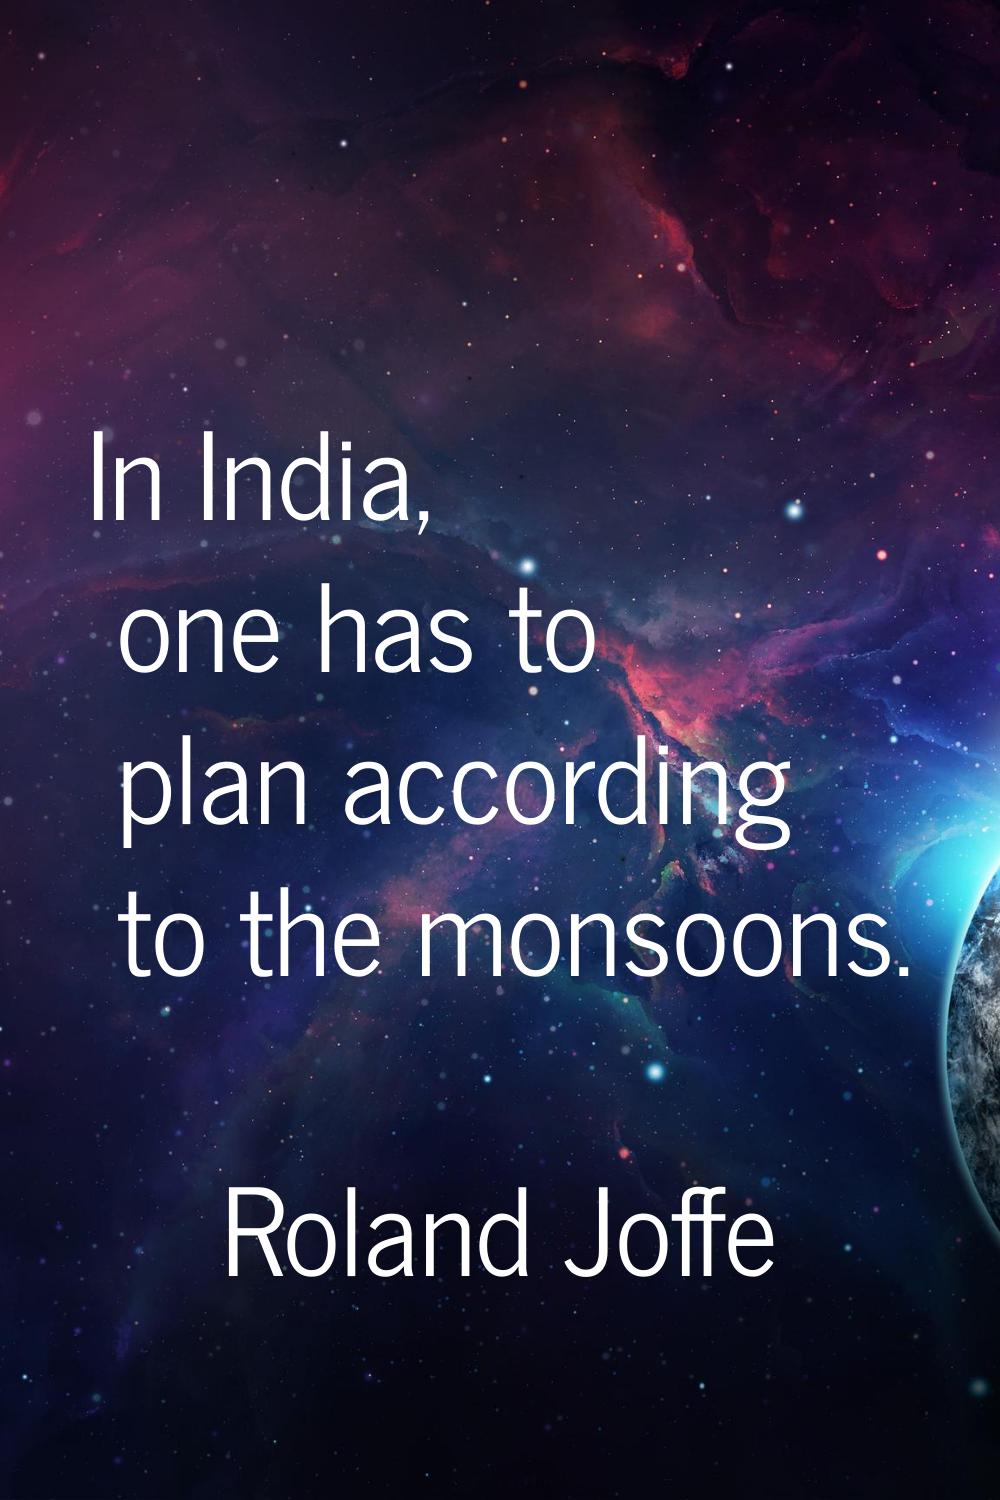 In India, one has to plan according to the monsoons.